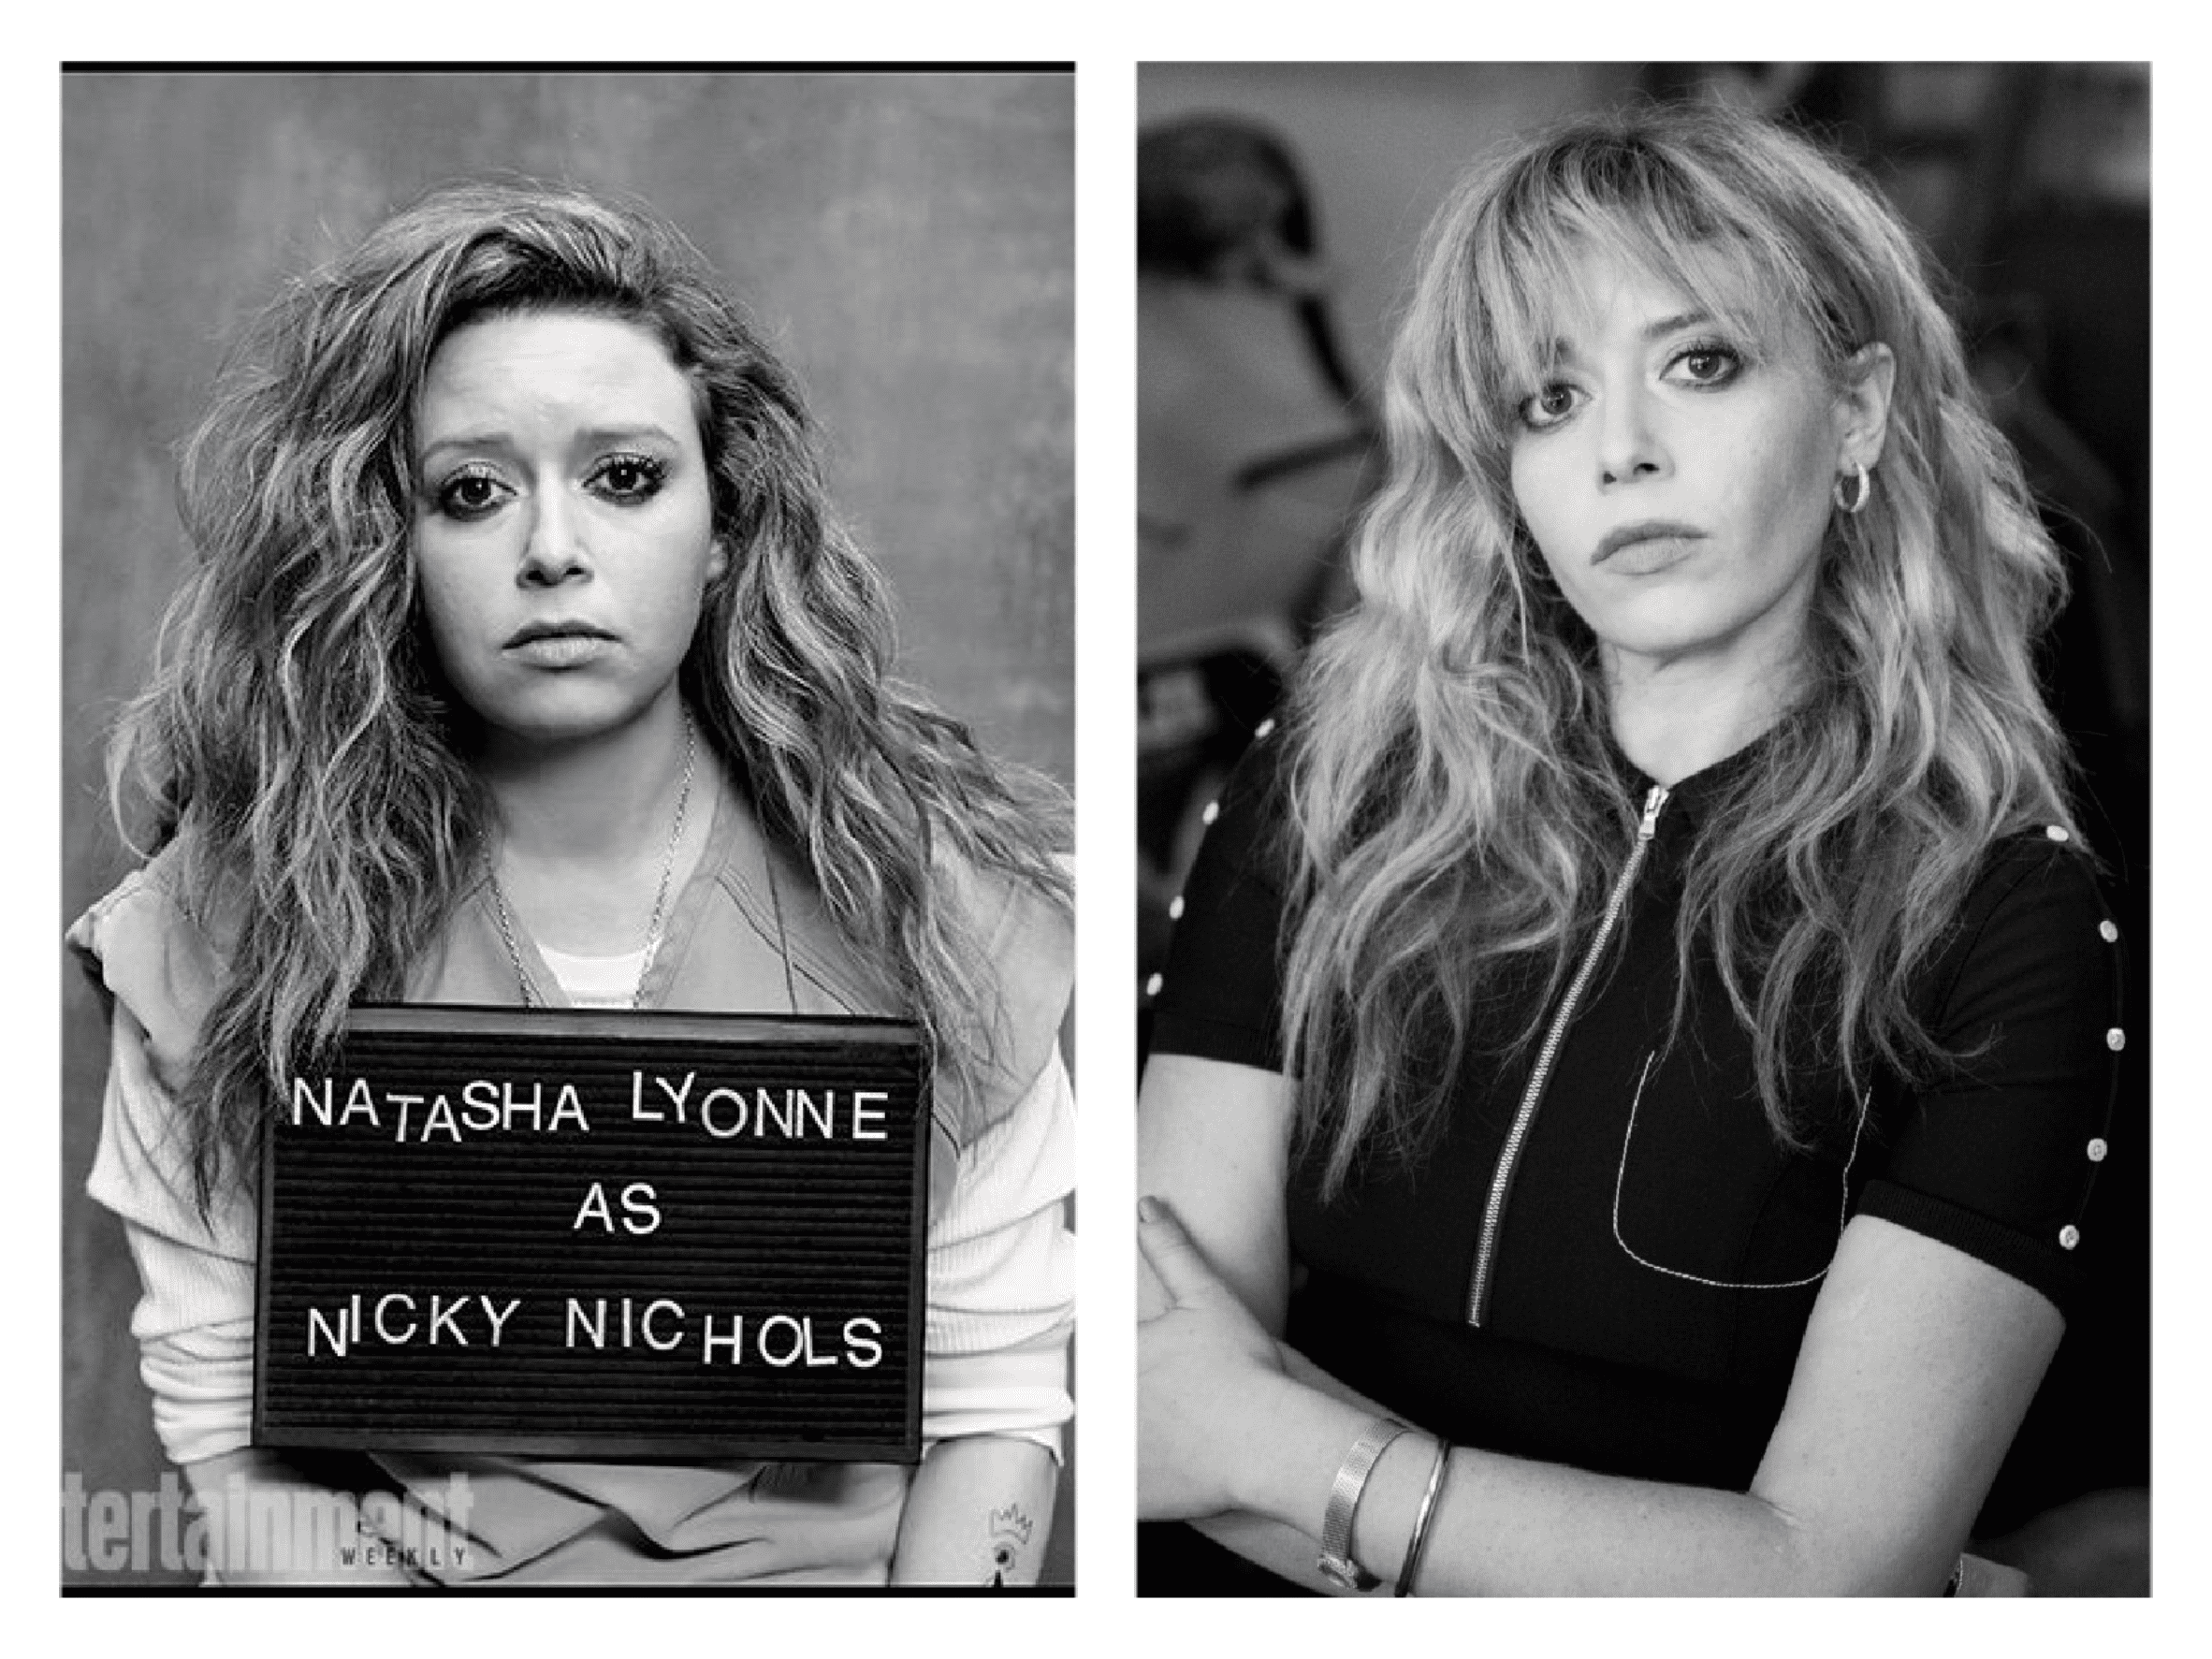 Natasha Lyonne as Nicky Nicols and to the right shown in real life 